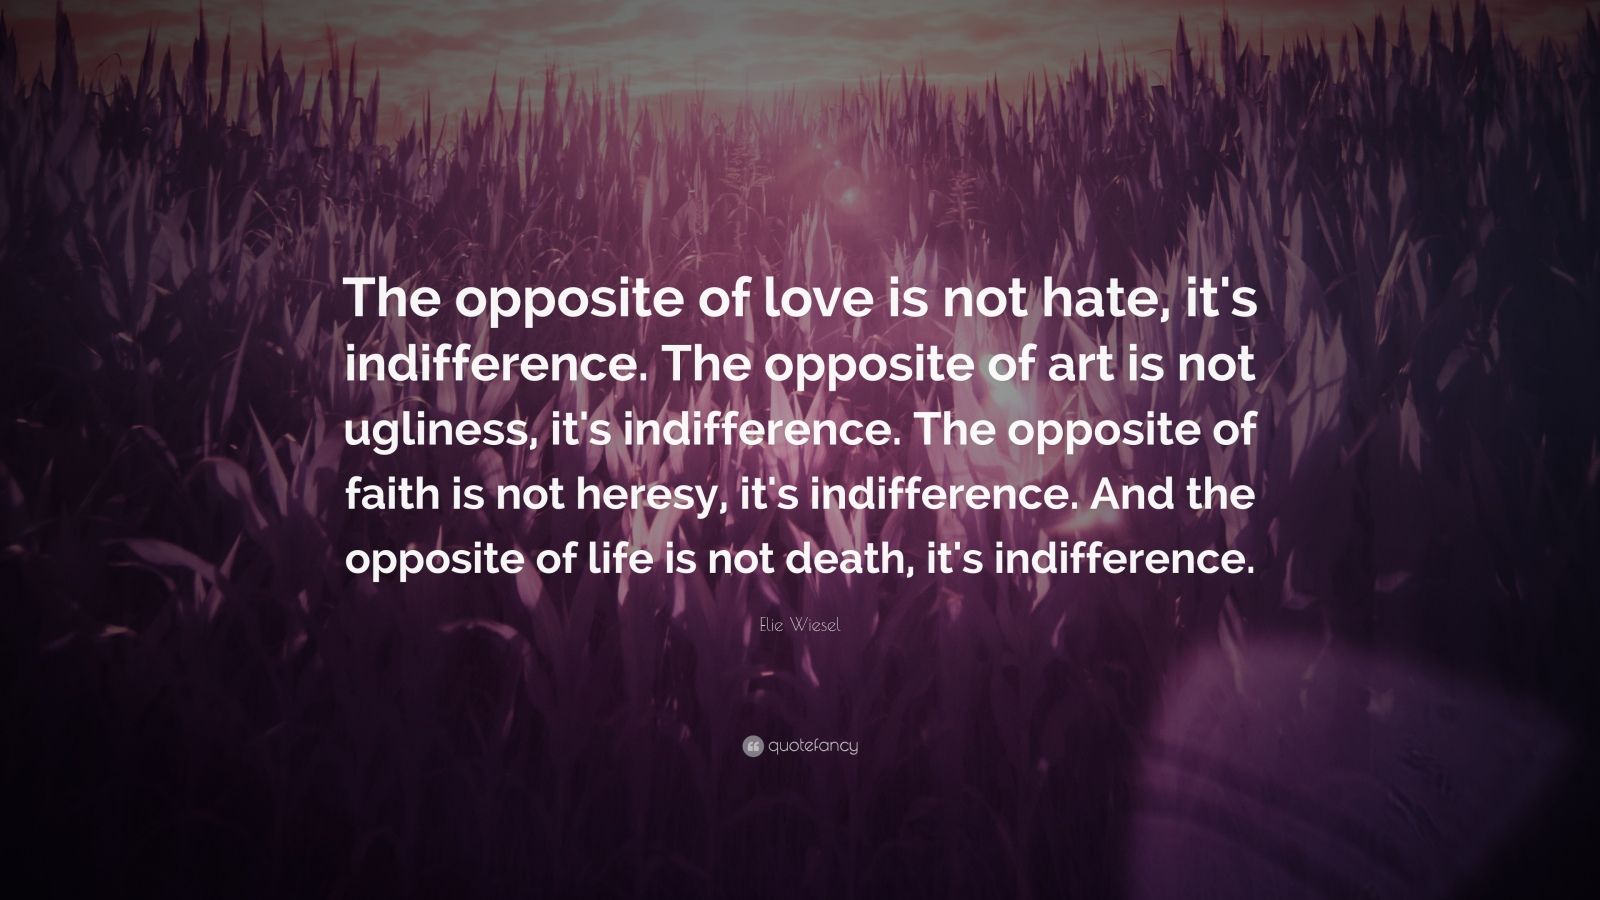 5635 Elie Wiesel Quote The opposite of love is not hate it s